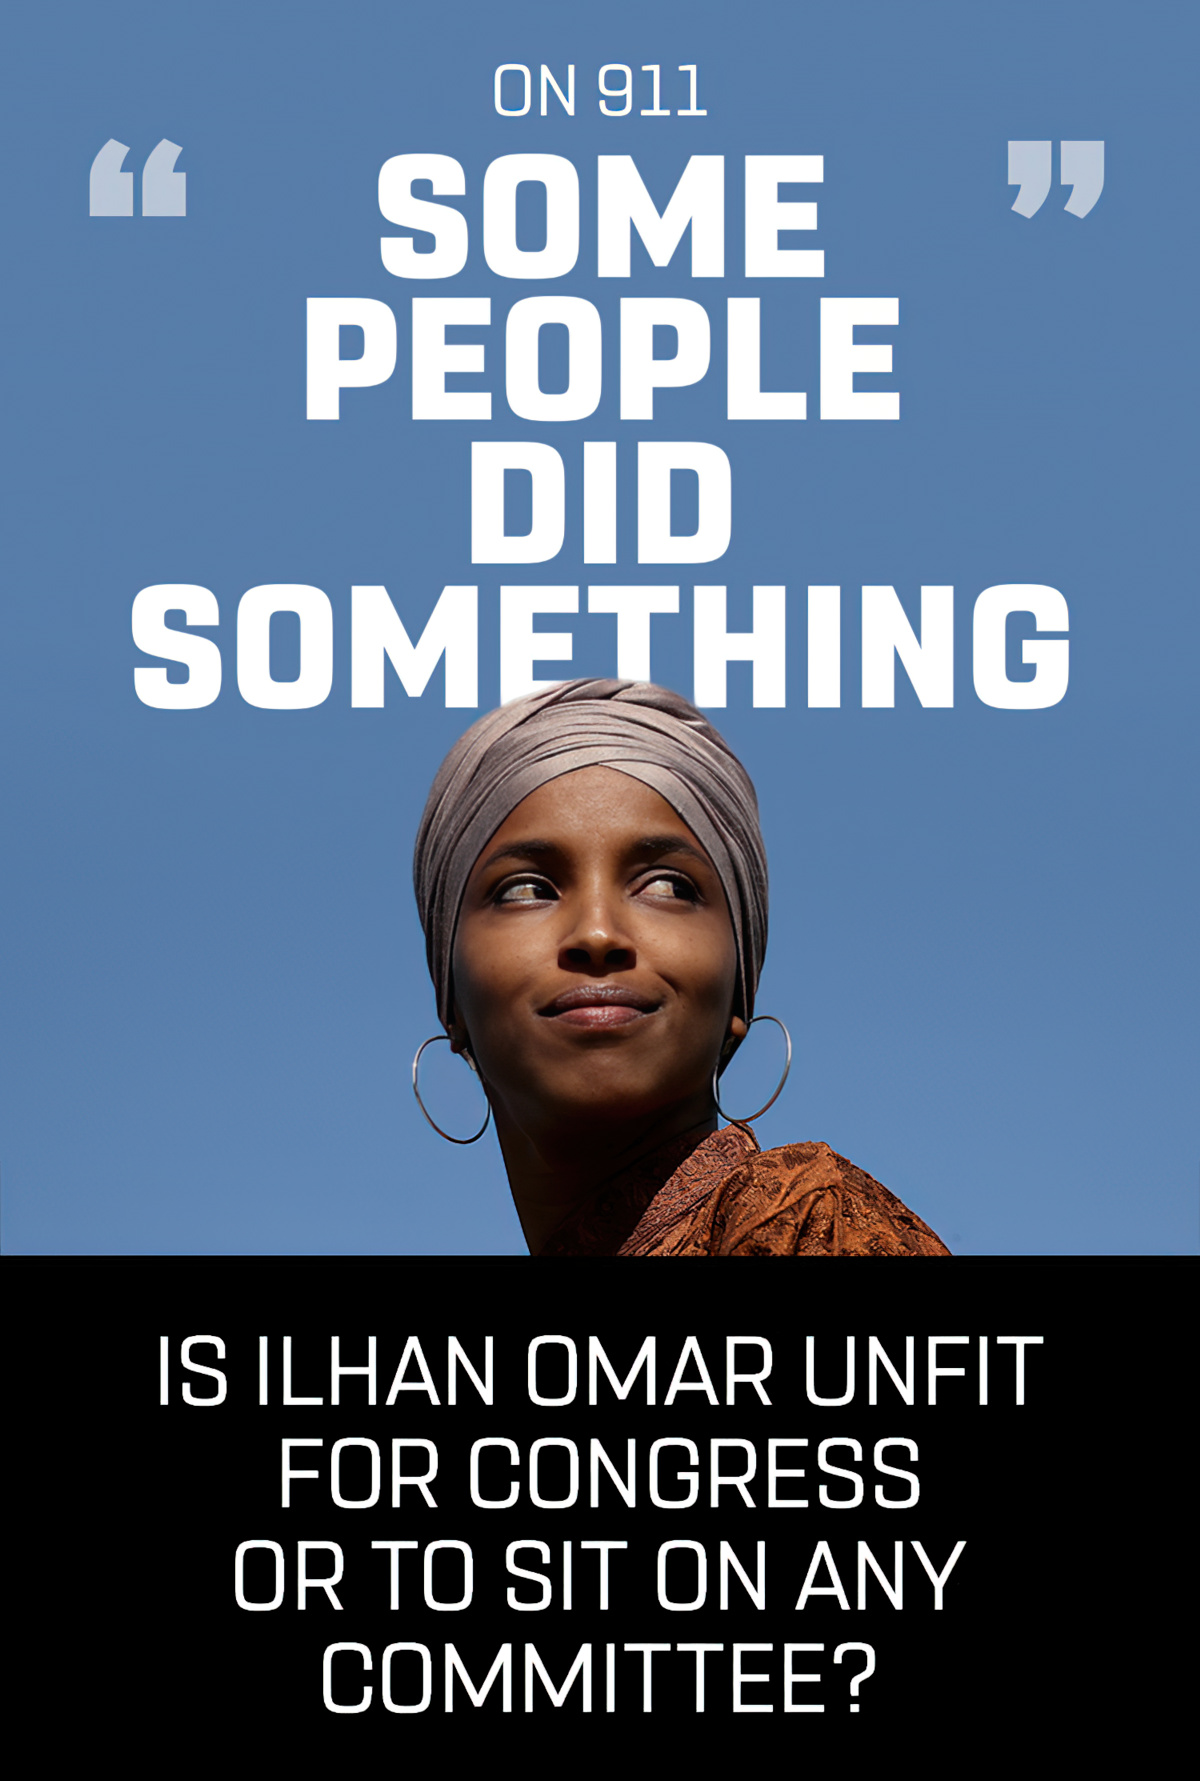 Is Ilhan Omar unfit for Congress?